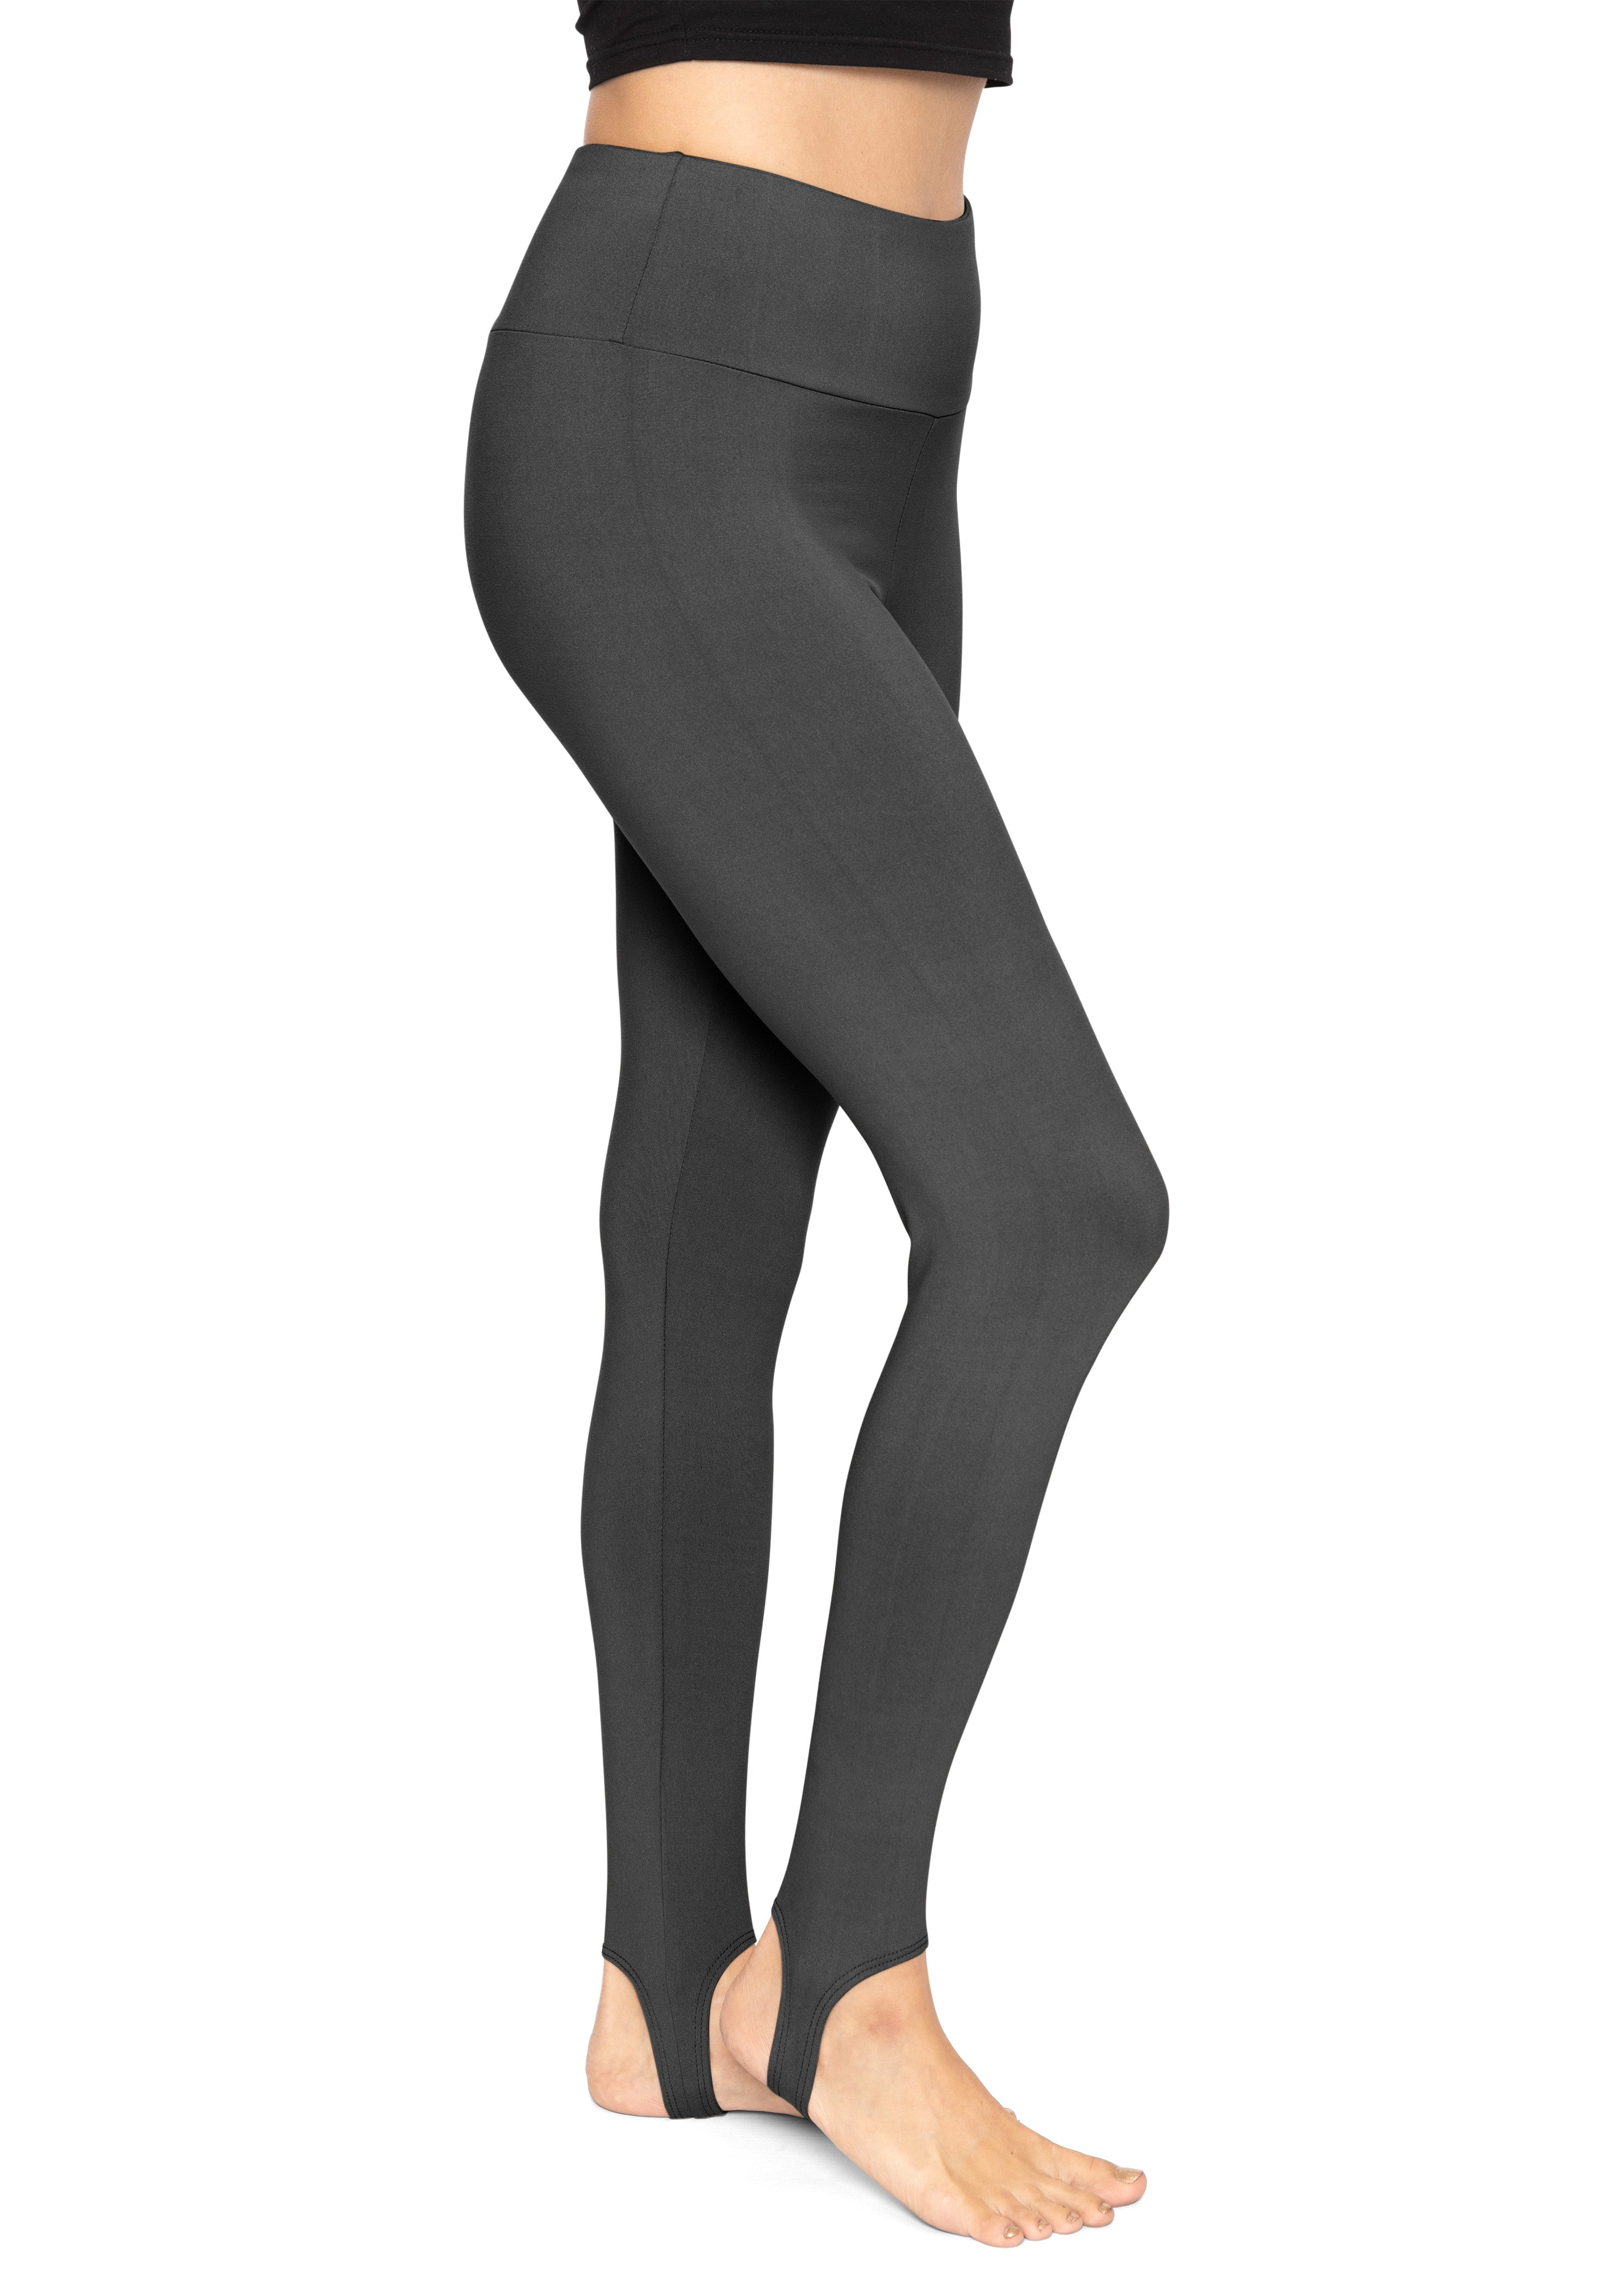 Stretch Is Comfort Women's Oh so Soft High Waist Stirrup Leggings| Adult  Small- Large